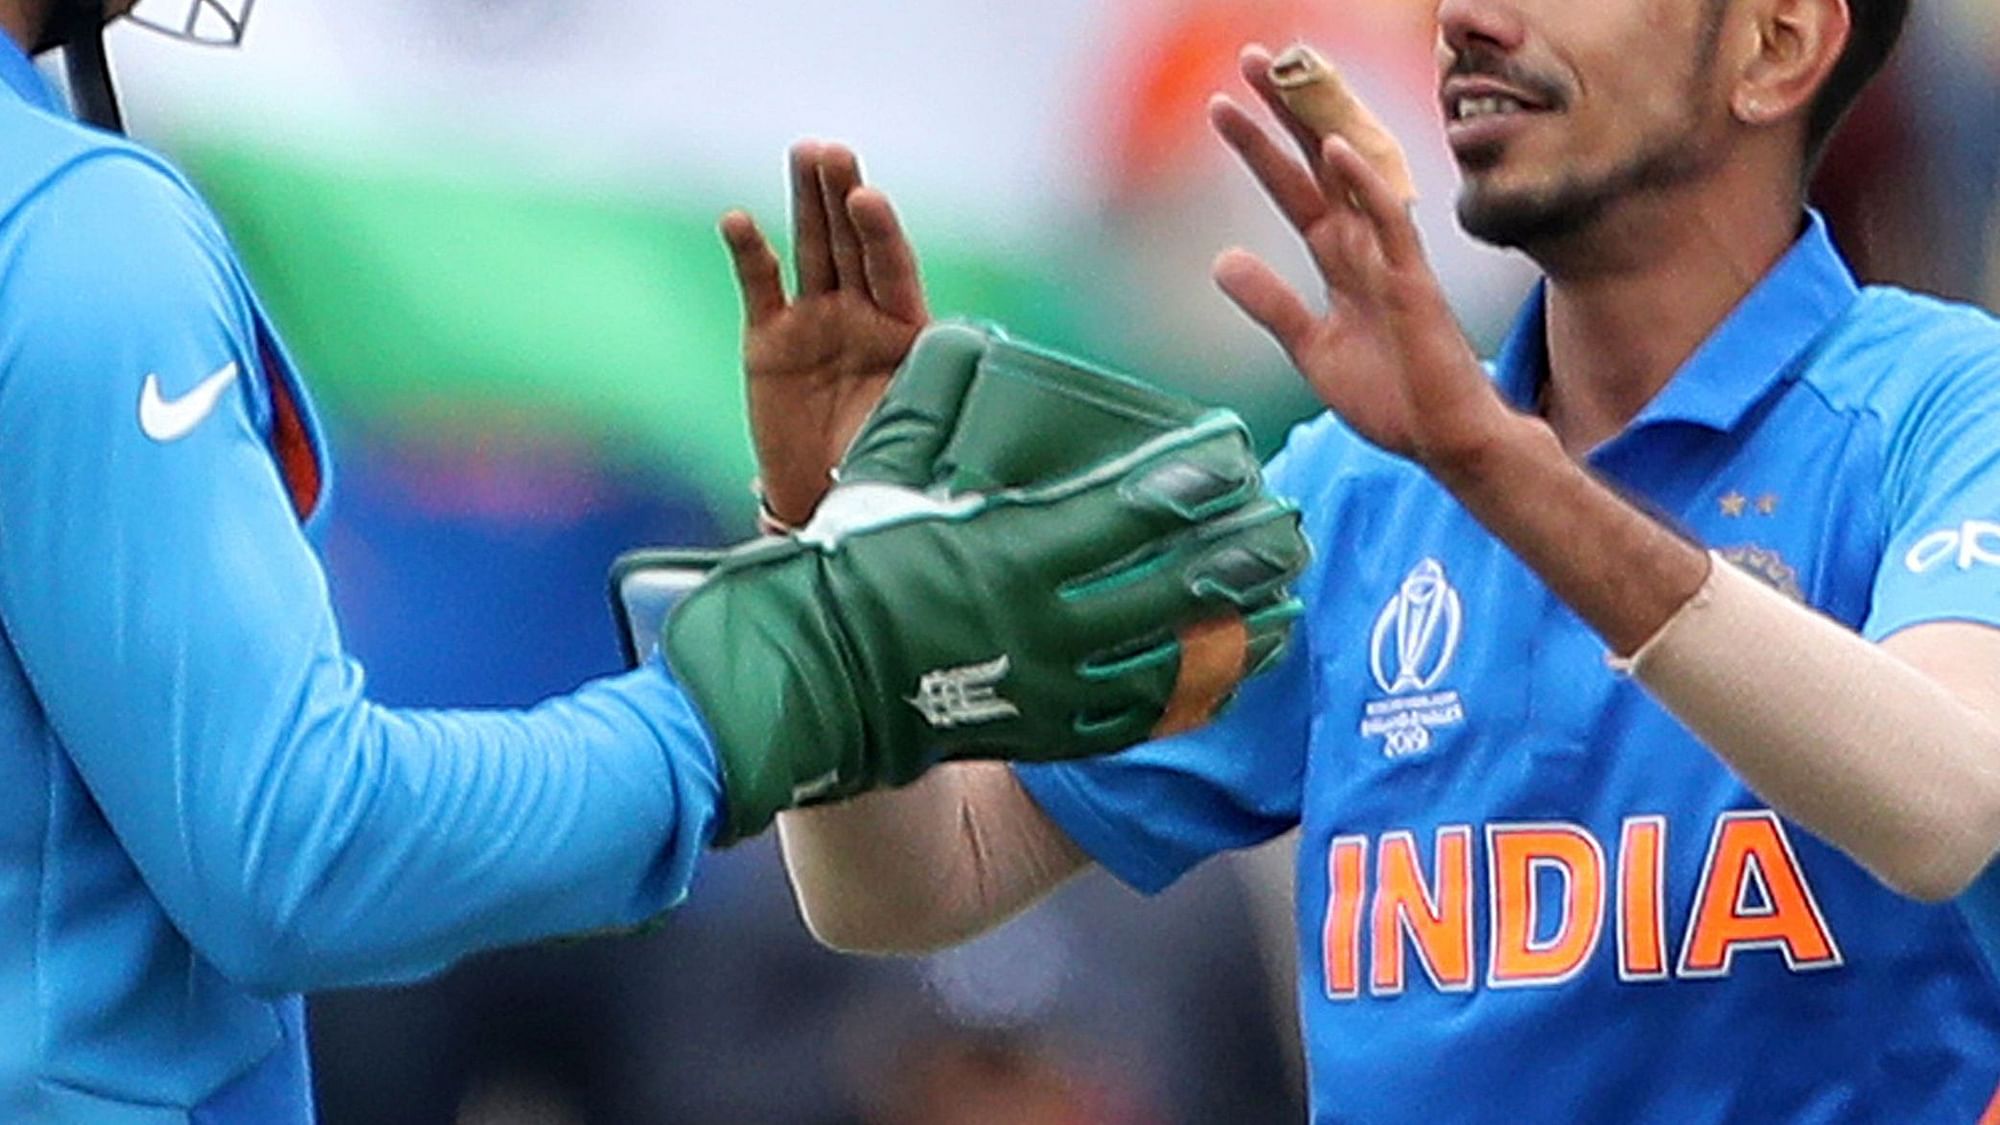 MS Dhoni was seen sporting Army insignia on his wicket-keeping gloves during the ongoing World Cup.